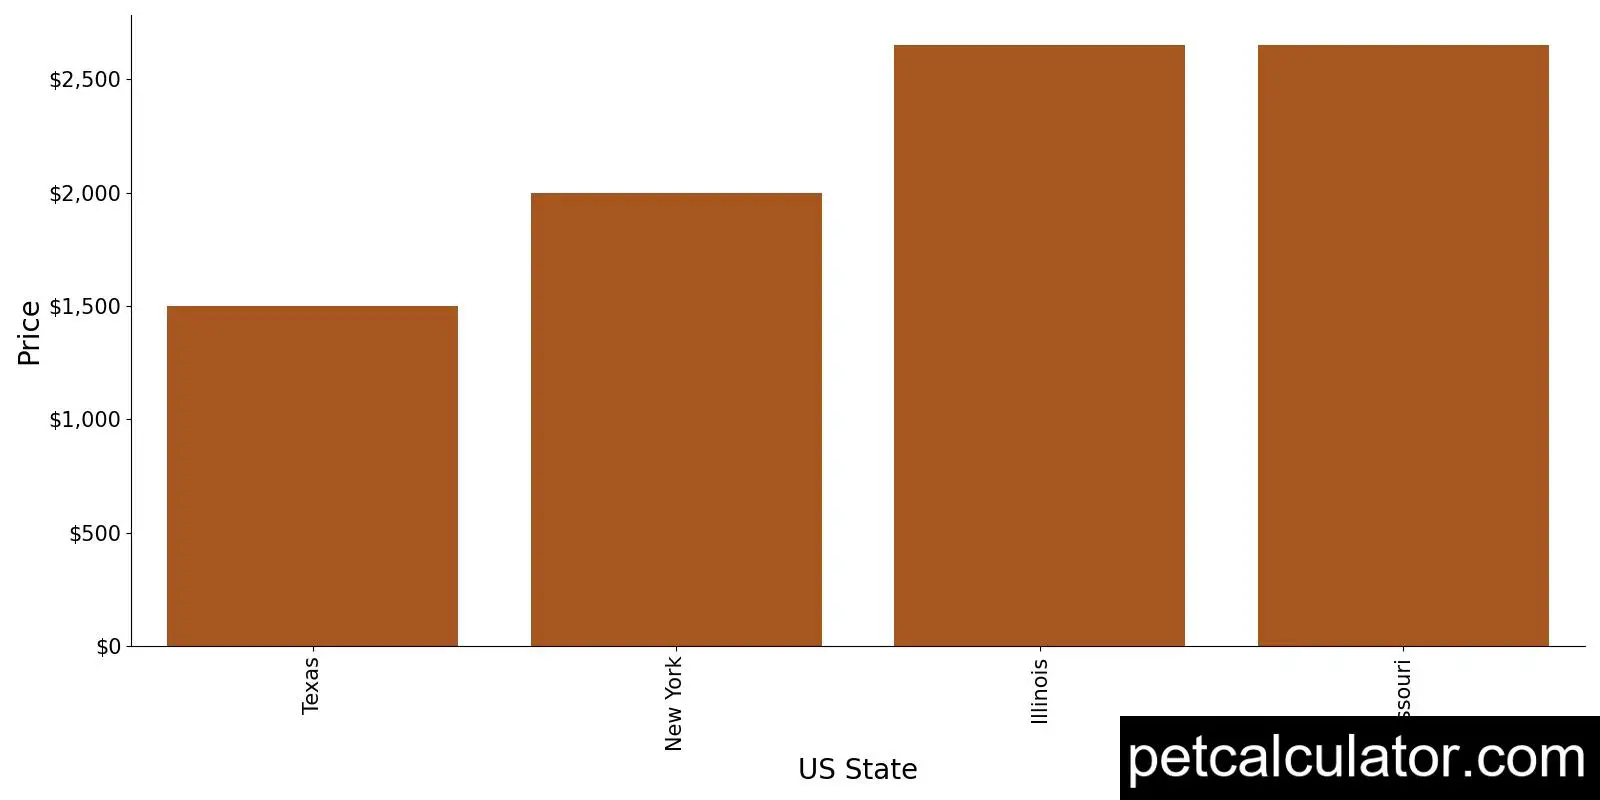 Price of Bedlington Terrier by US State 